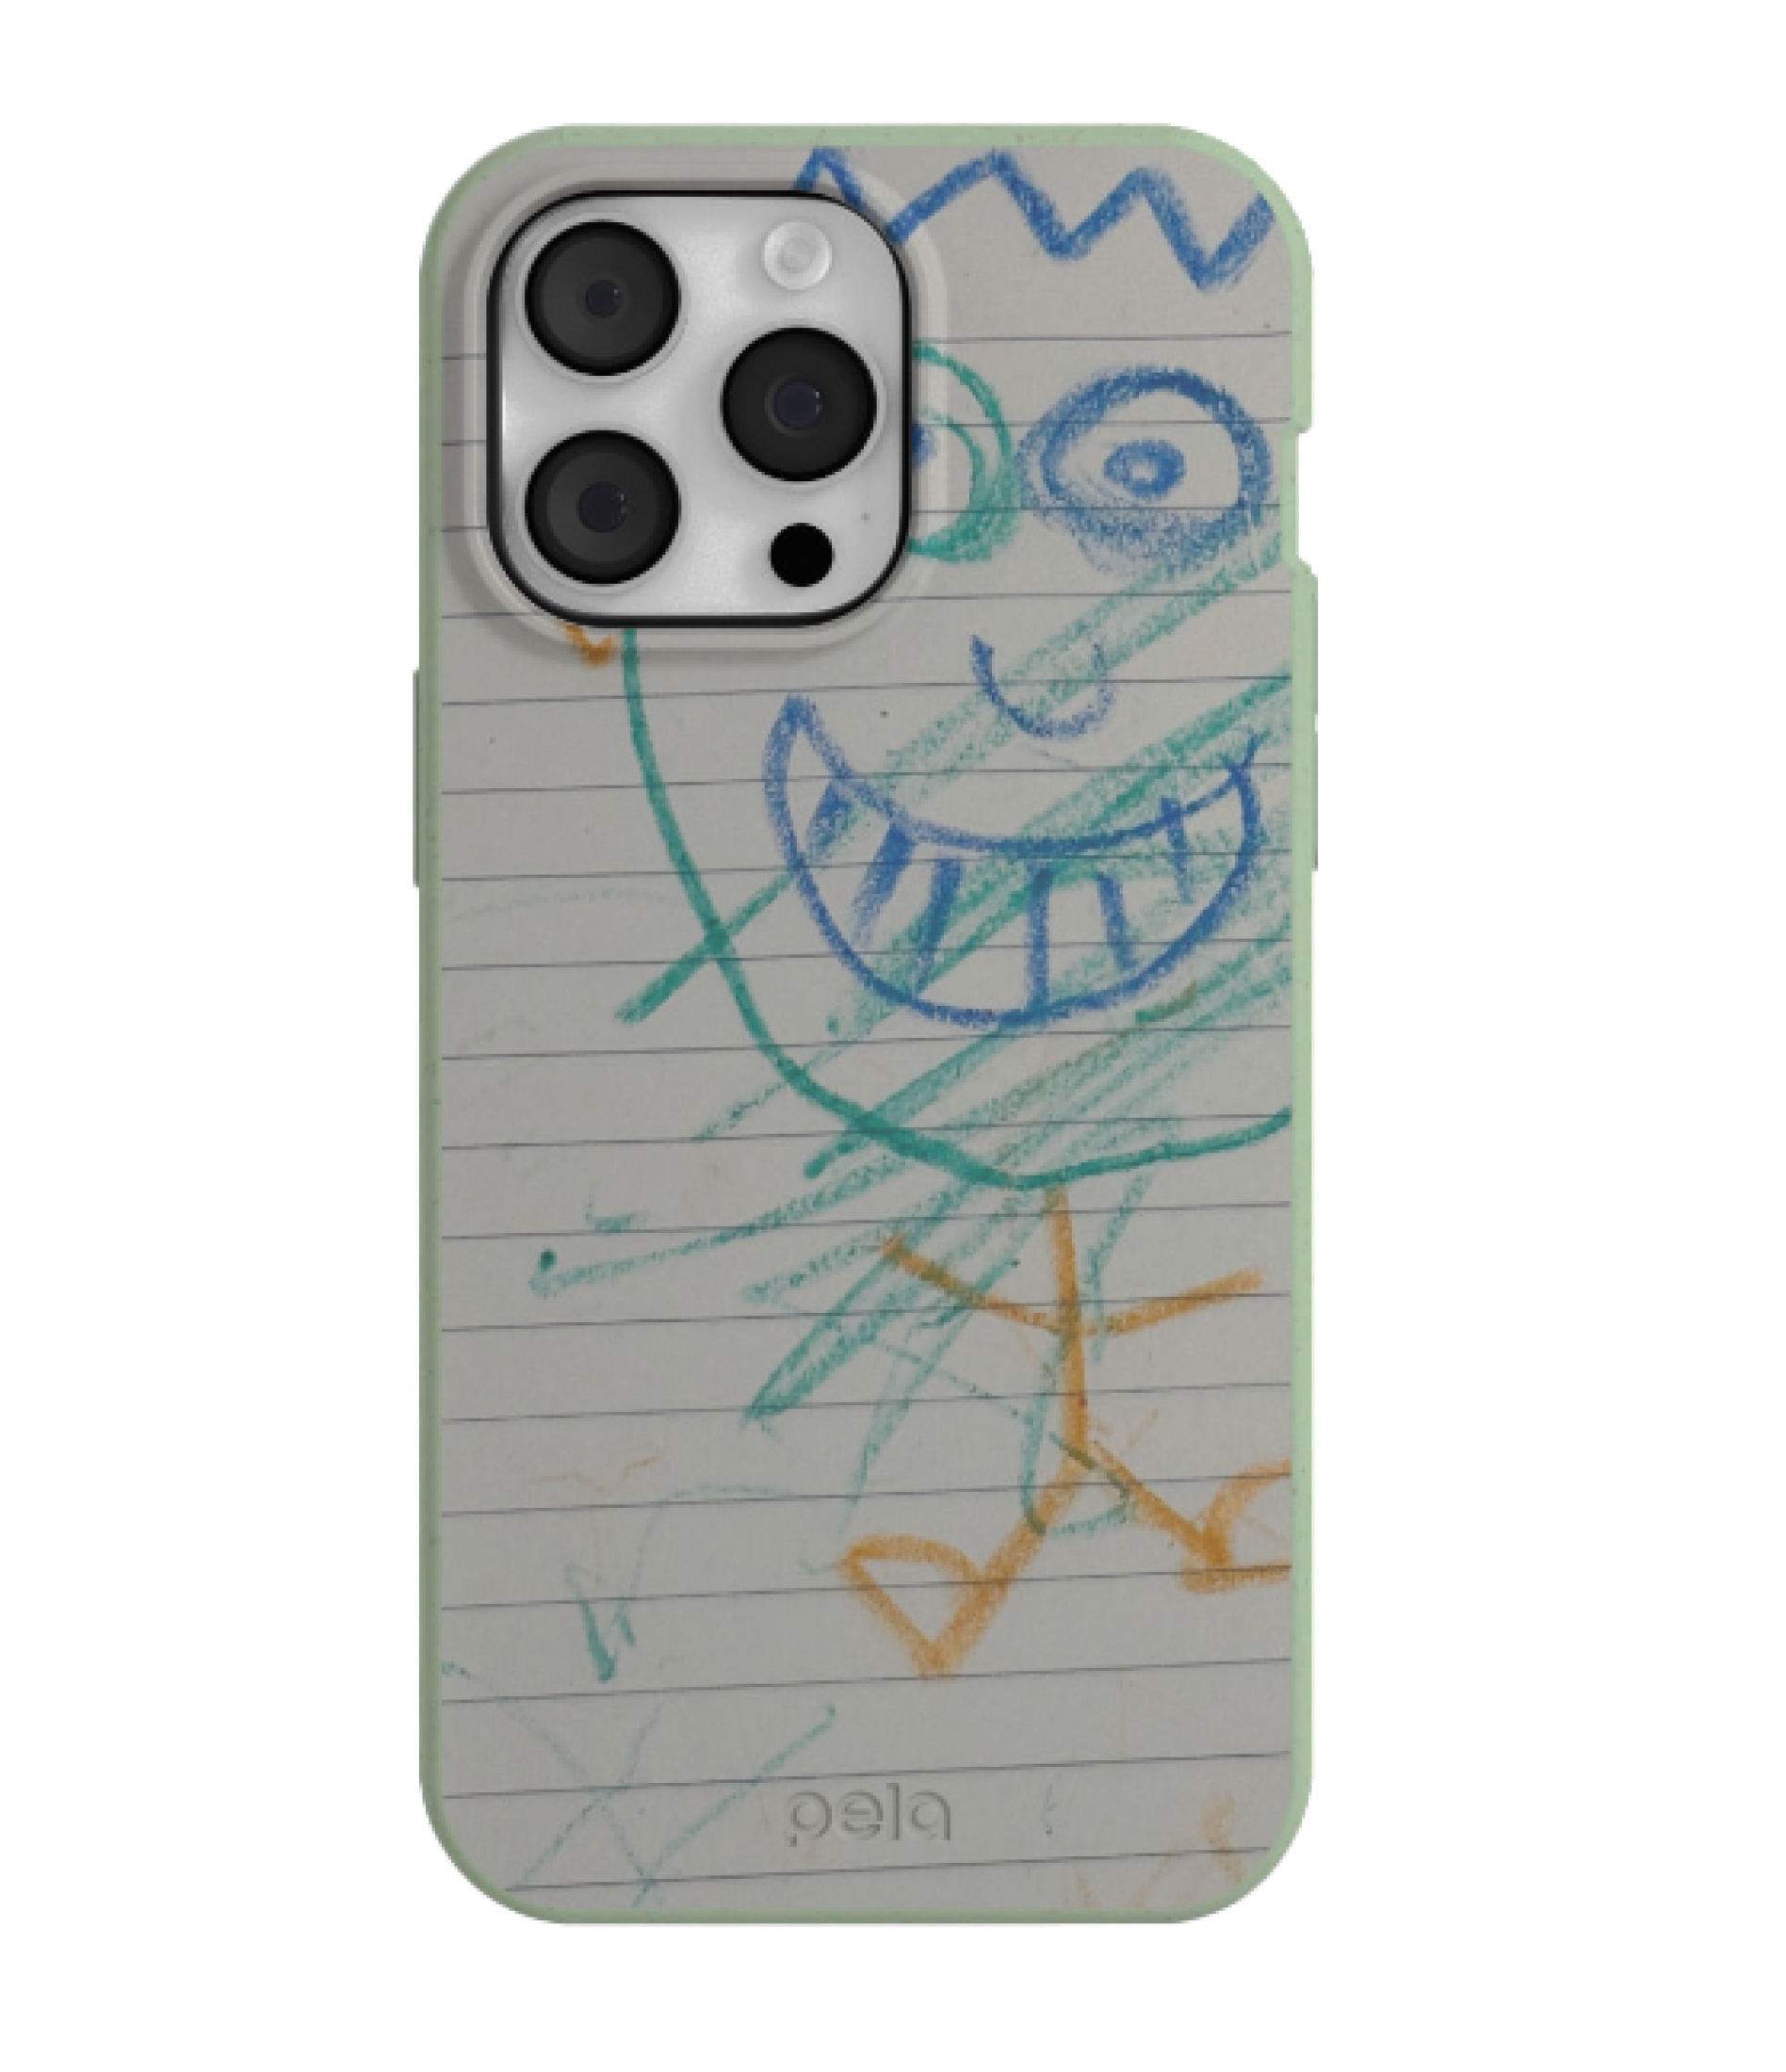 Child's crayon drawing on lined paper covering the back of a smartphone.